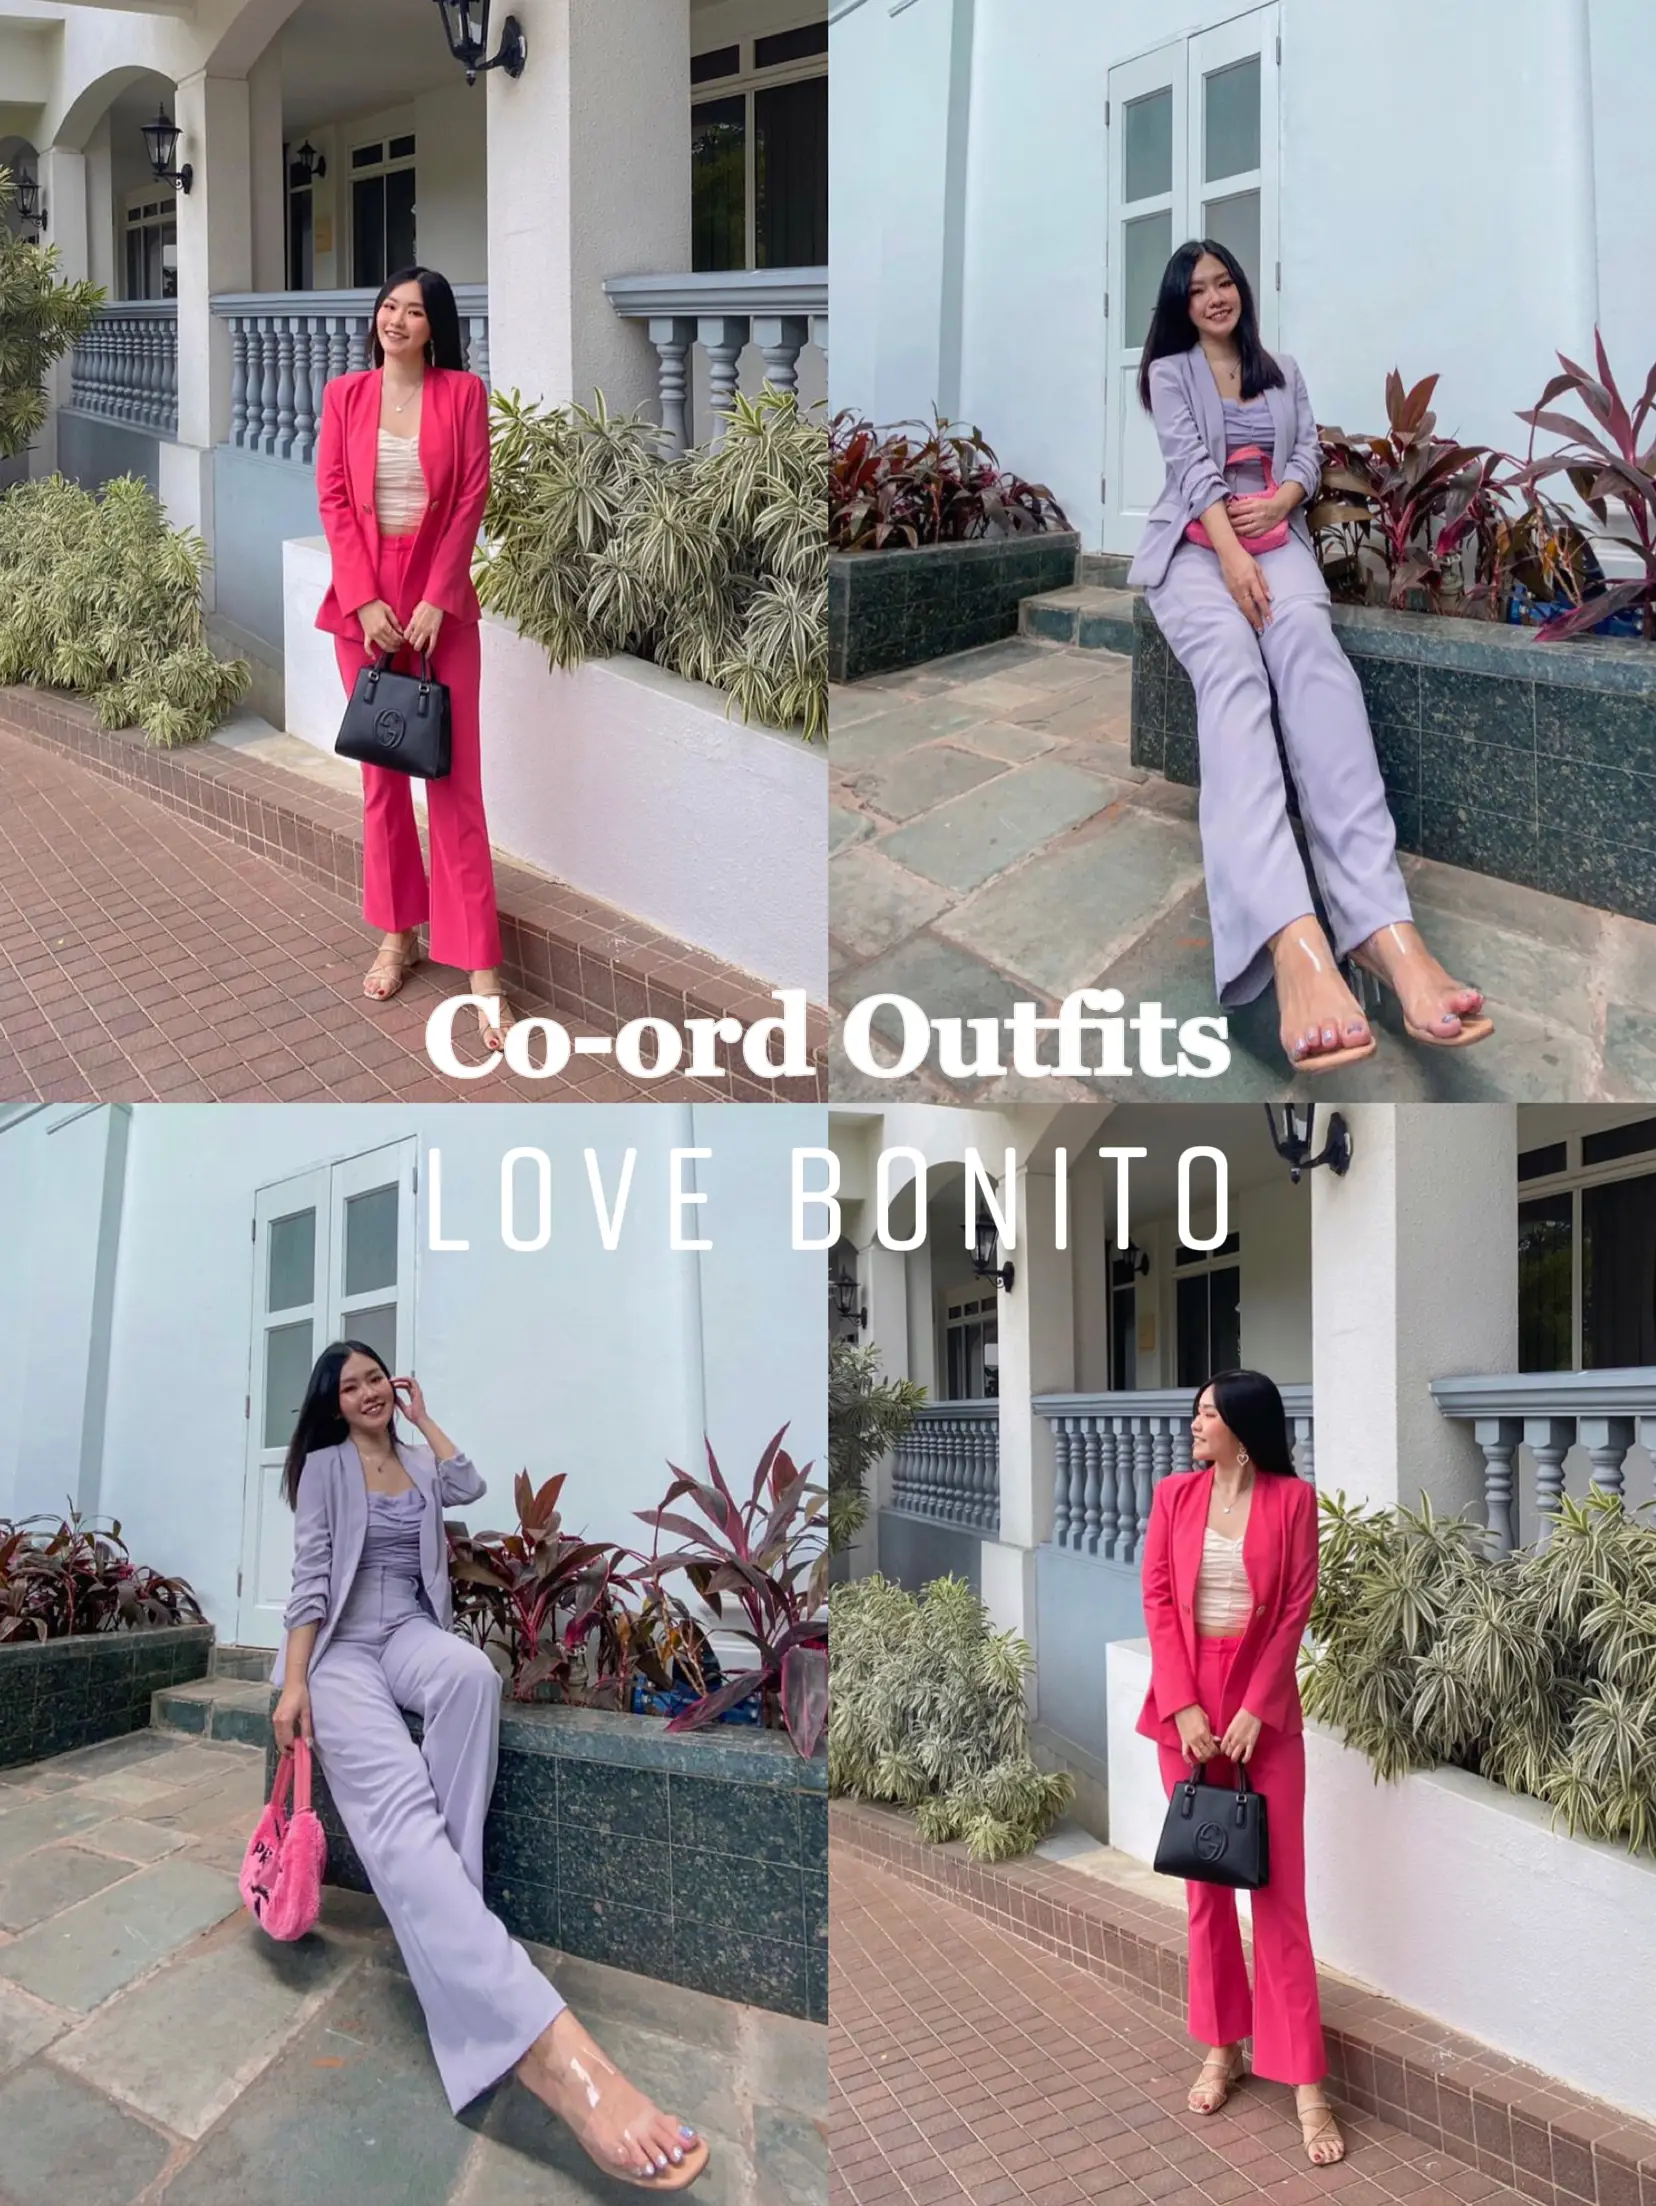 My favourite co-ord outfits from Love Bonito 🫶🏼